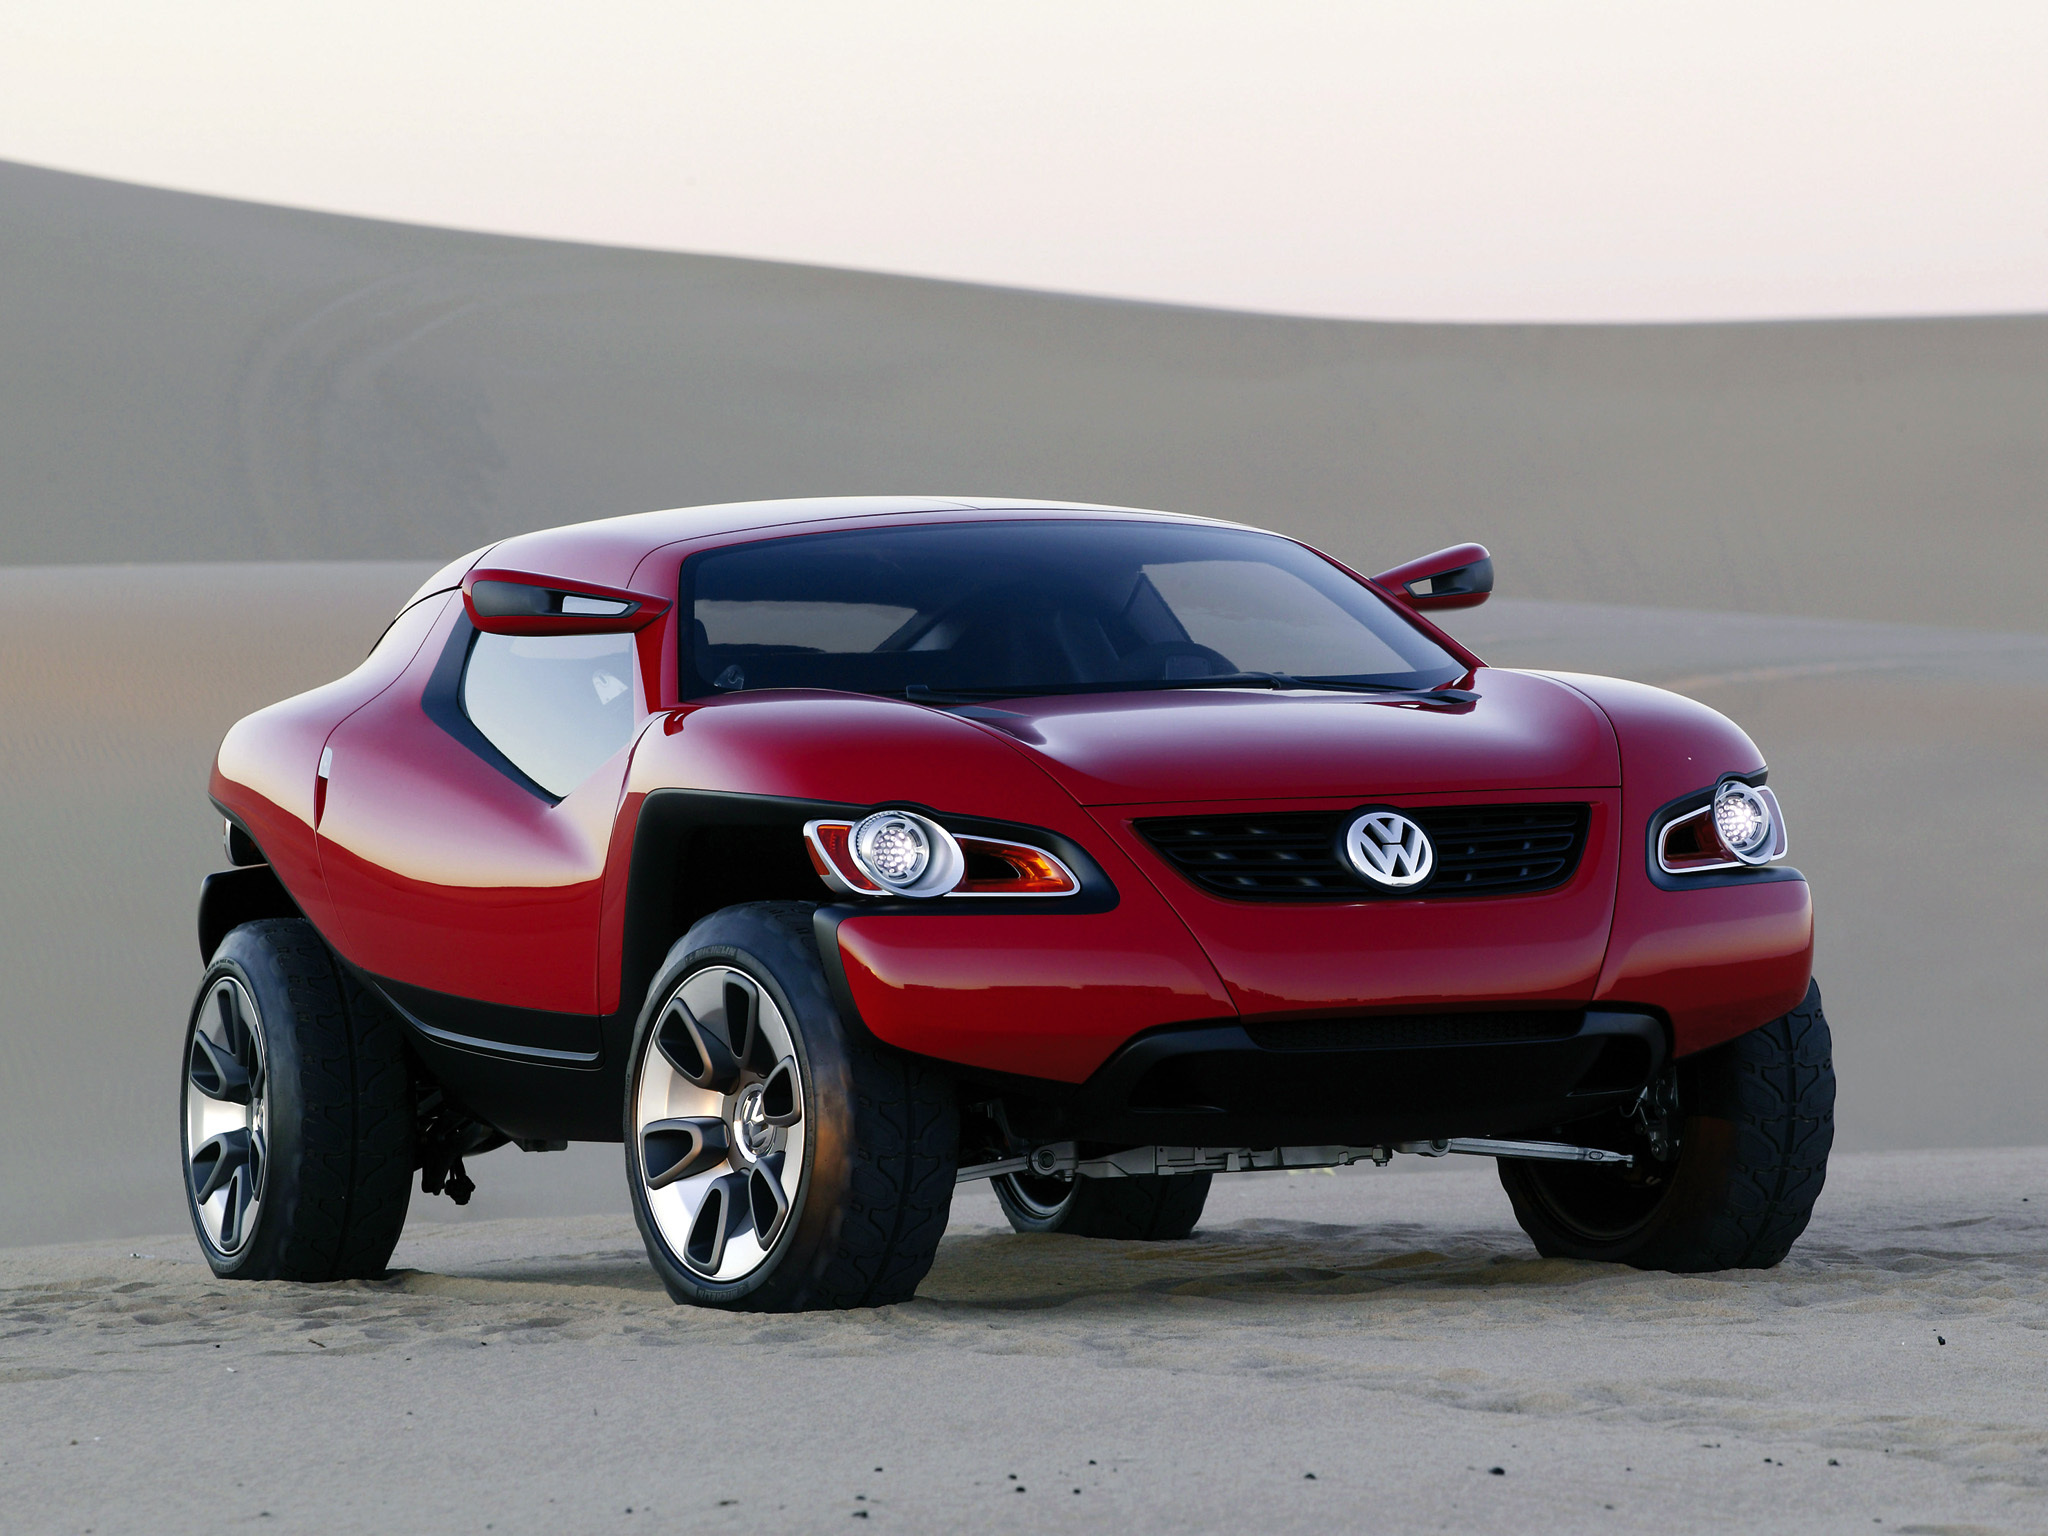 Wallpaper Off Road Sand A Concept Car Pictures And Photos